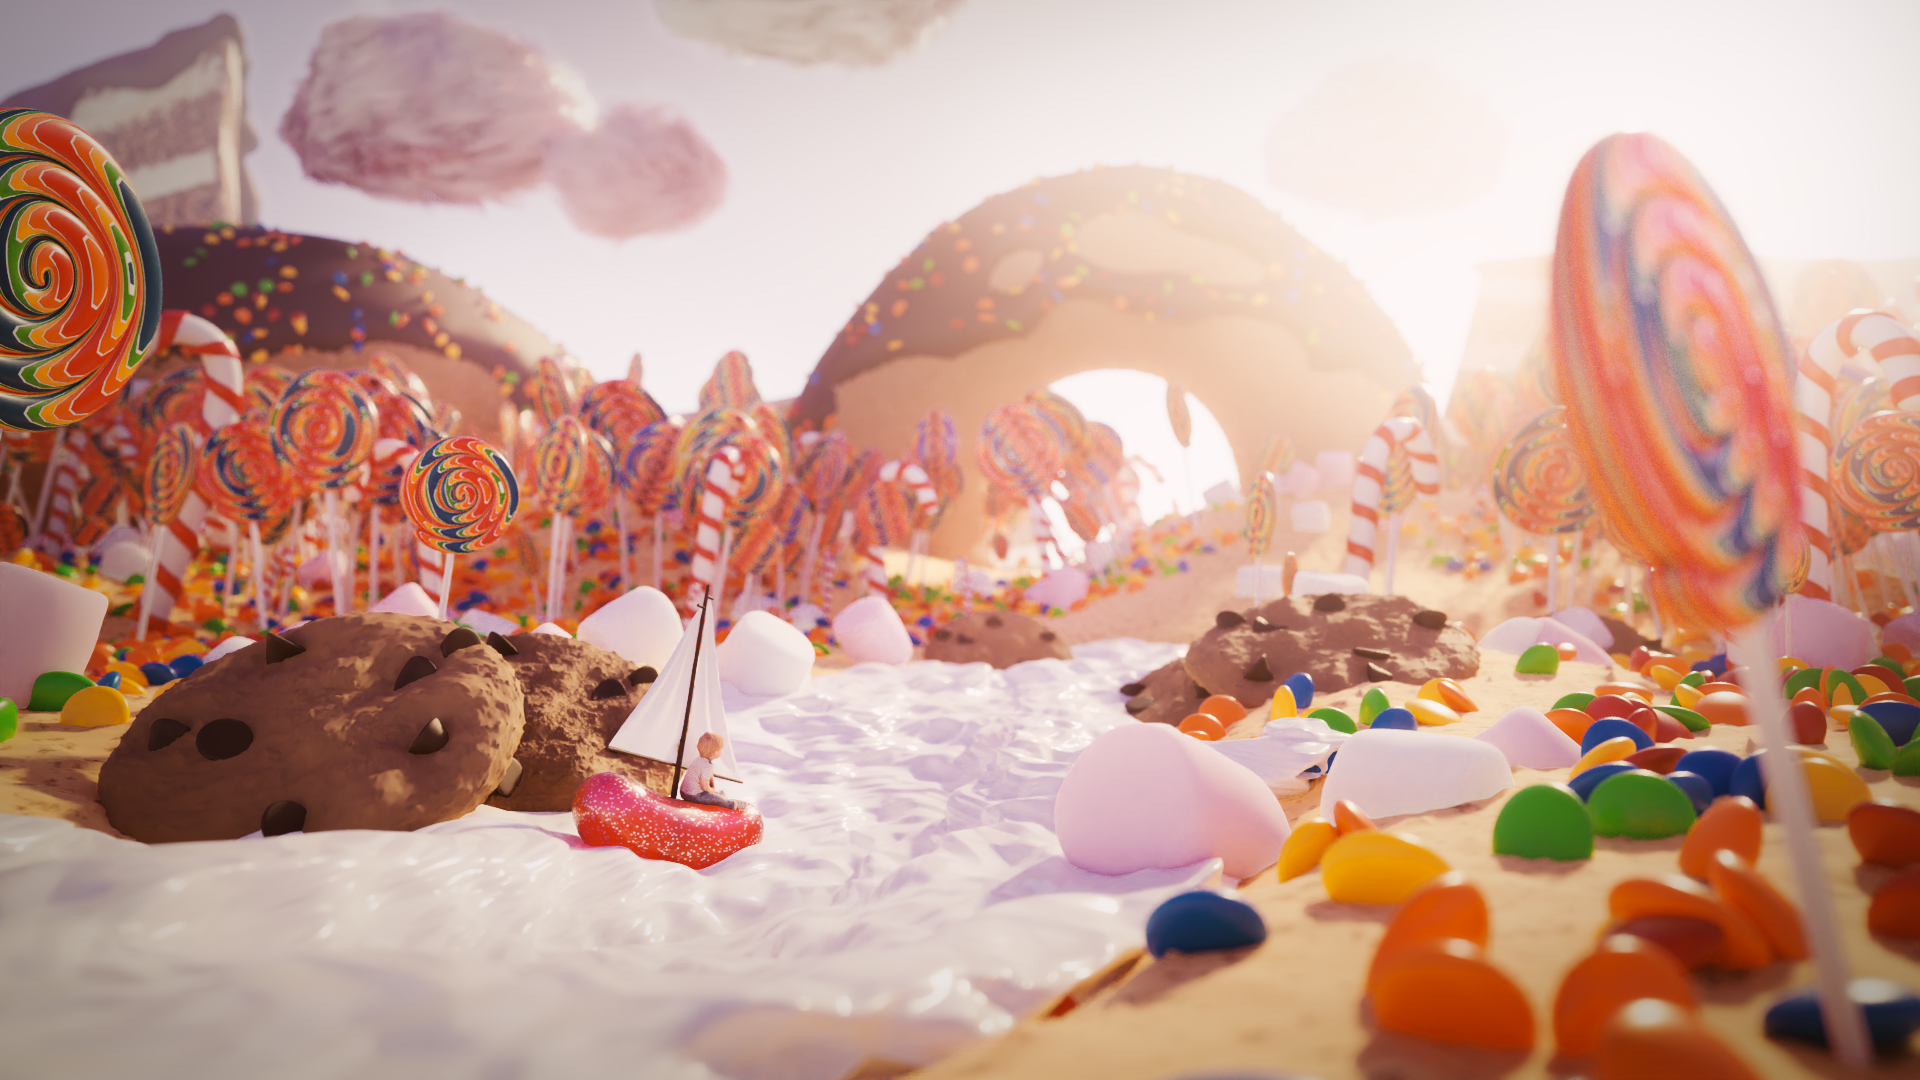 Candy world - Finished Projects - Blender Artists Community